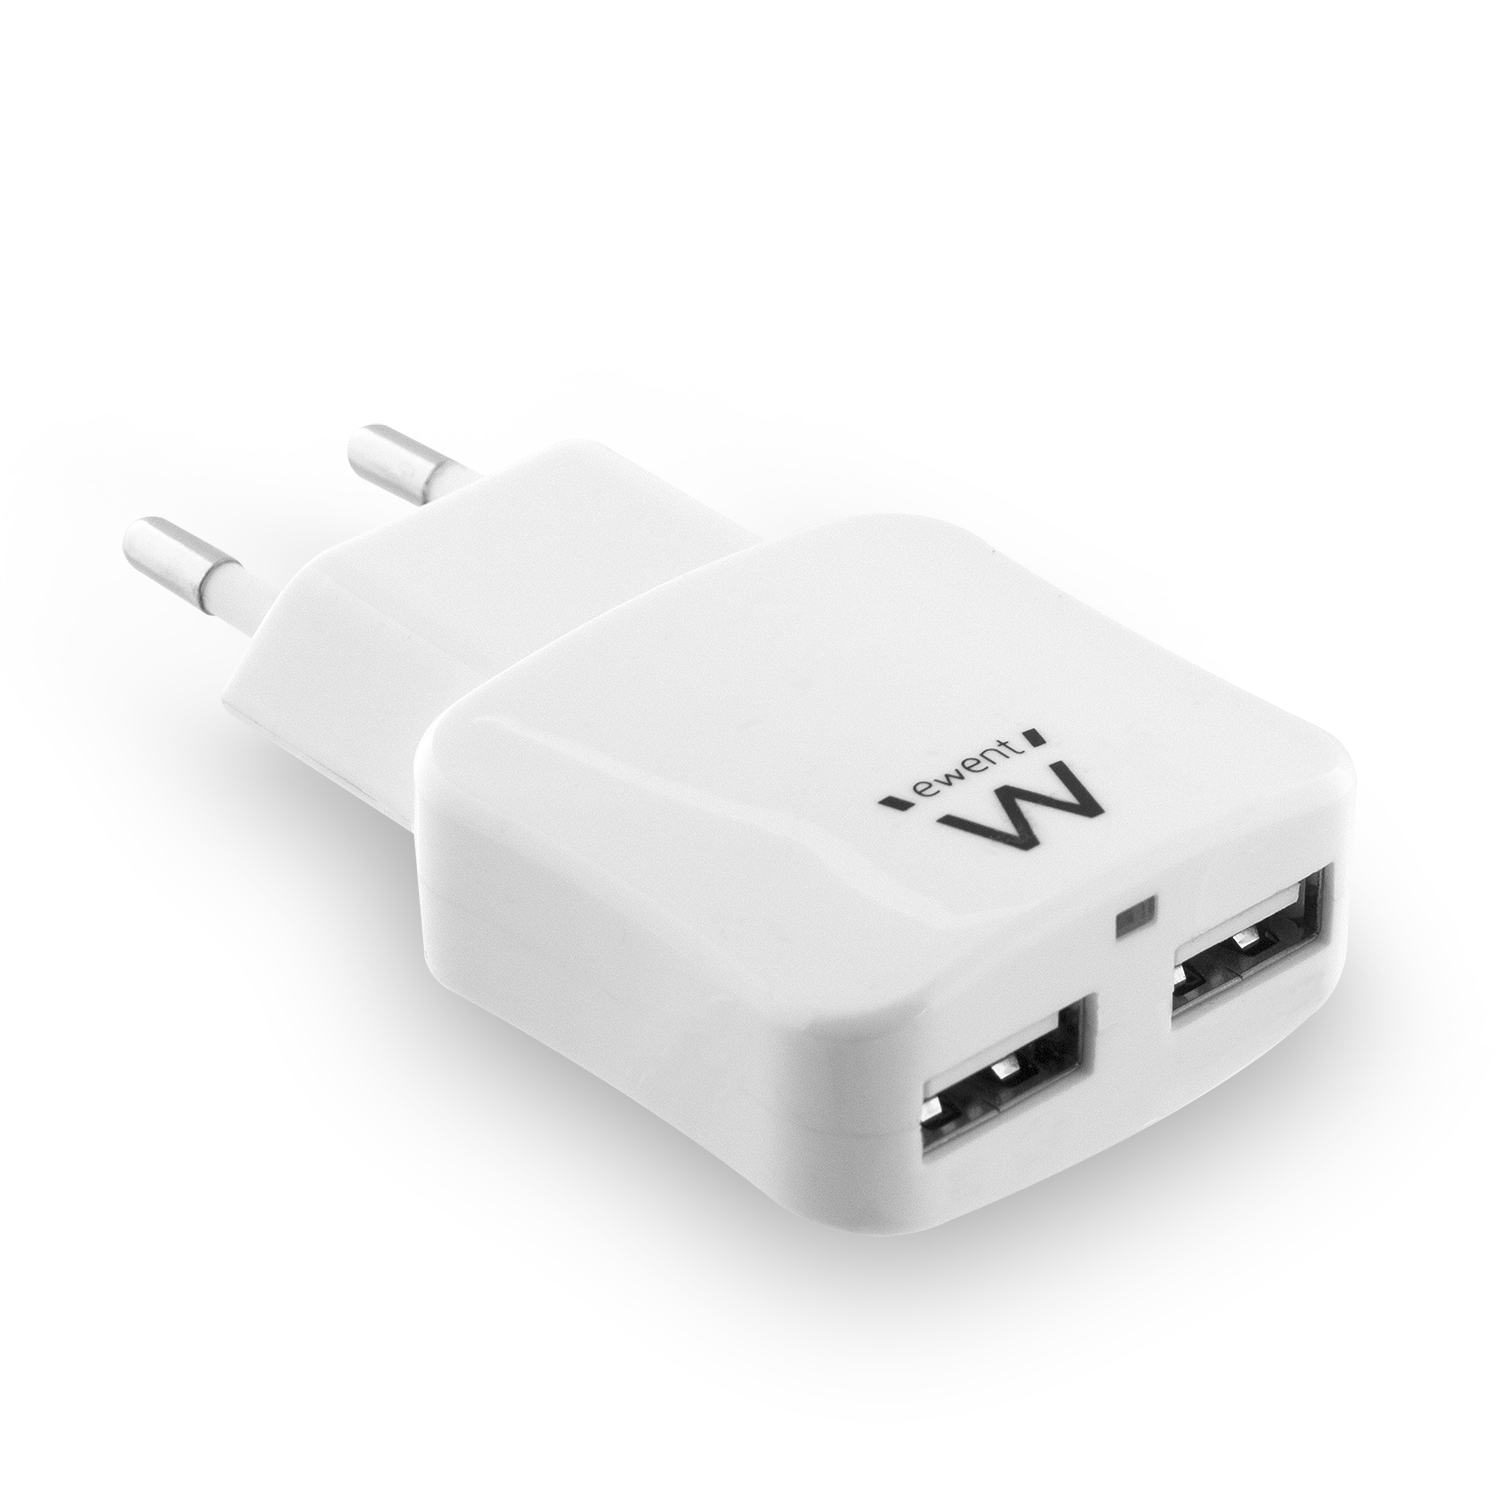 USB Adapter/Charger 2 port 5V / 2.4 A (EW1302)